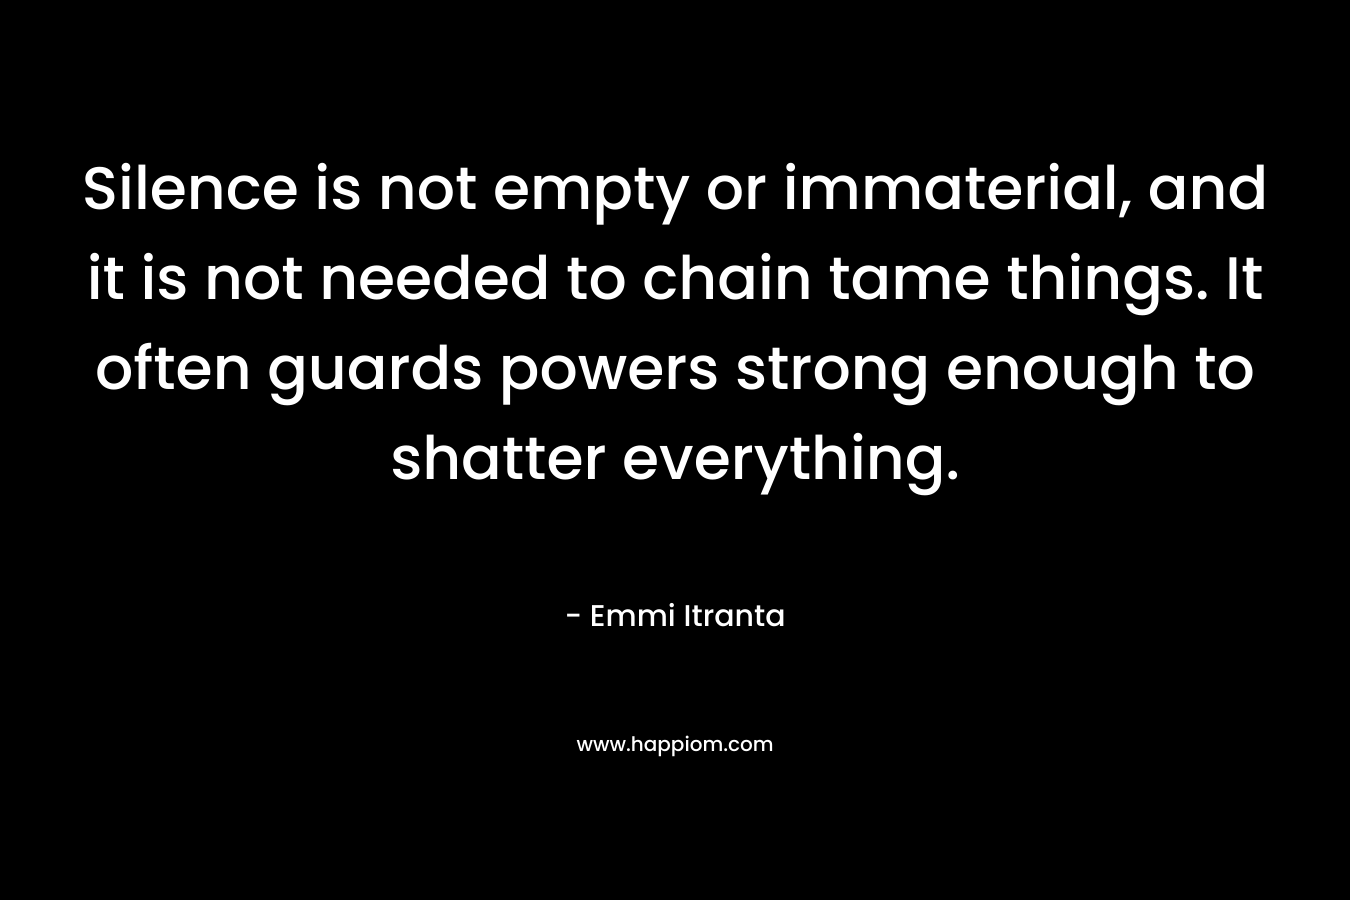 Silence is not empty or immaterial, and it is not needed to chain tame things. It often guards powers strong enough to shatter everything. – Emmi Itranta